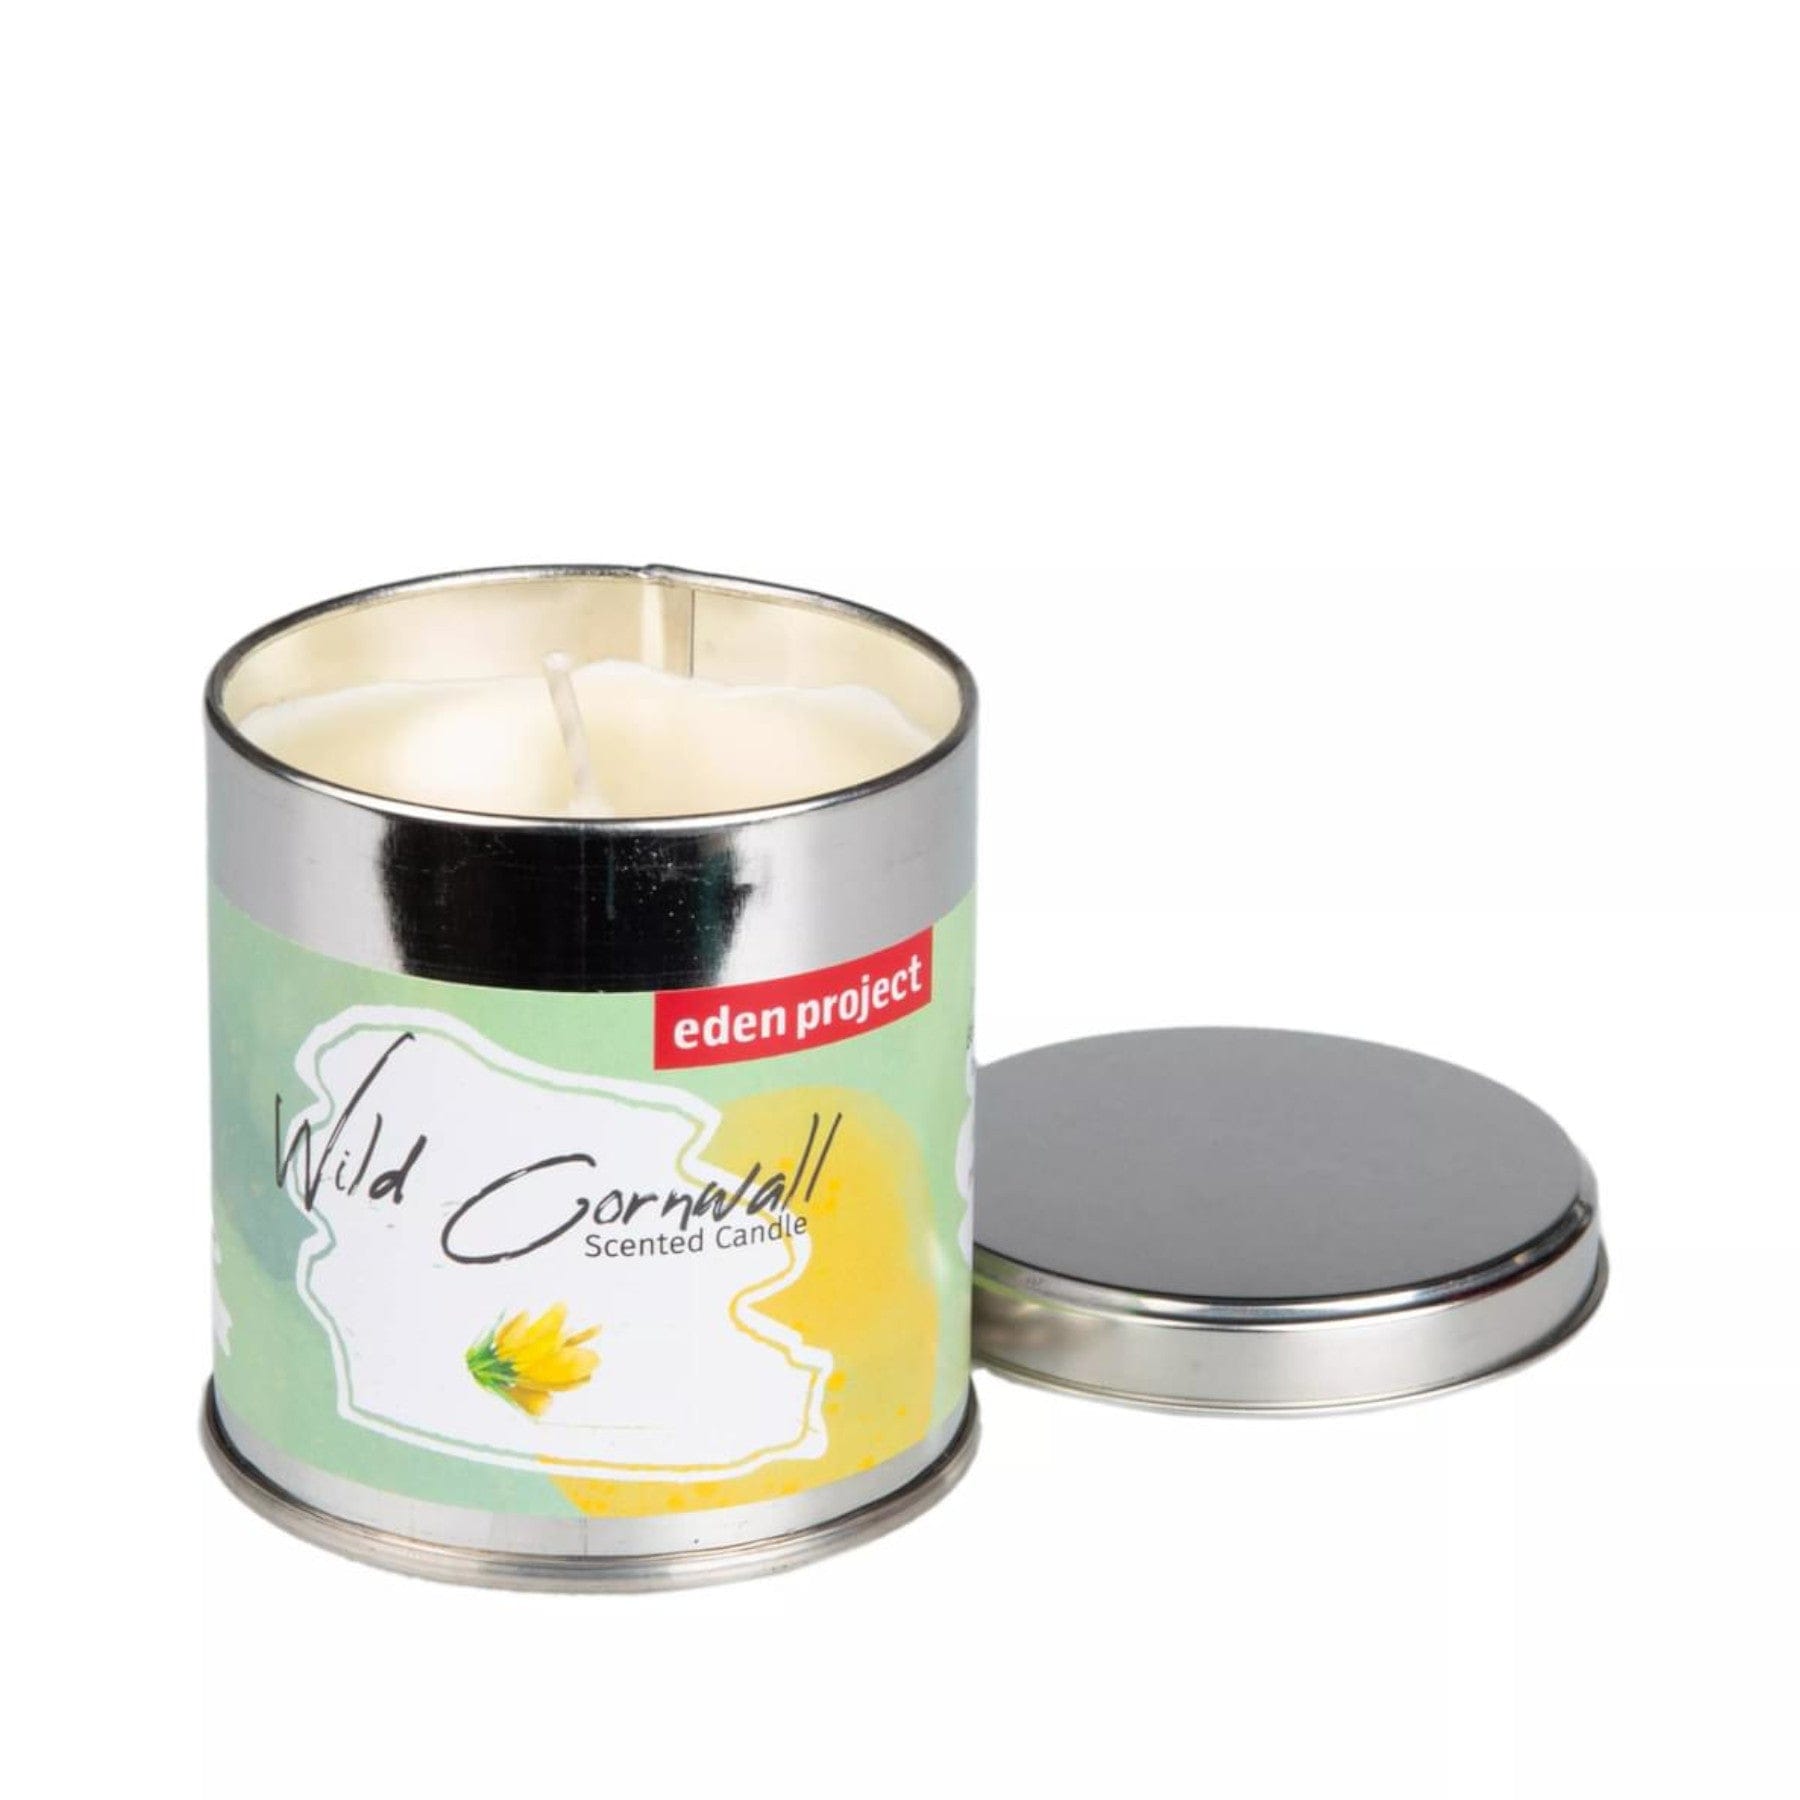 Eden Project Wild Cornwall scented candle with unlit wick in tin container and detached lid on white background.